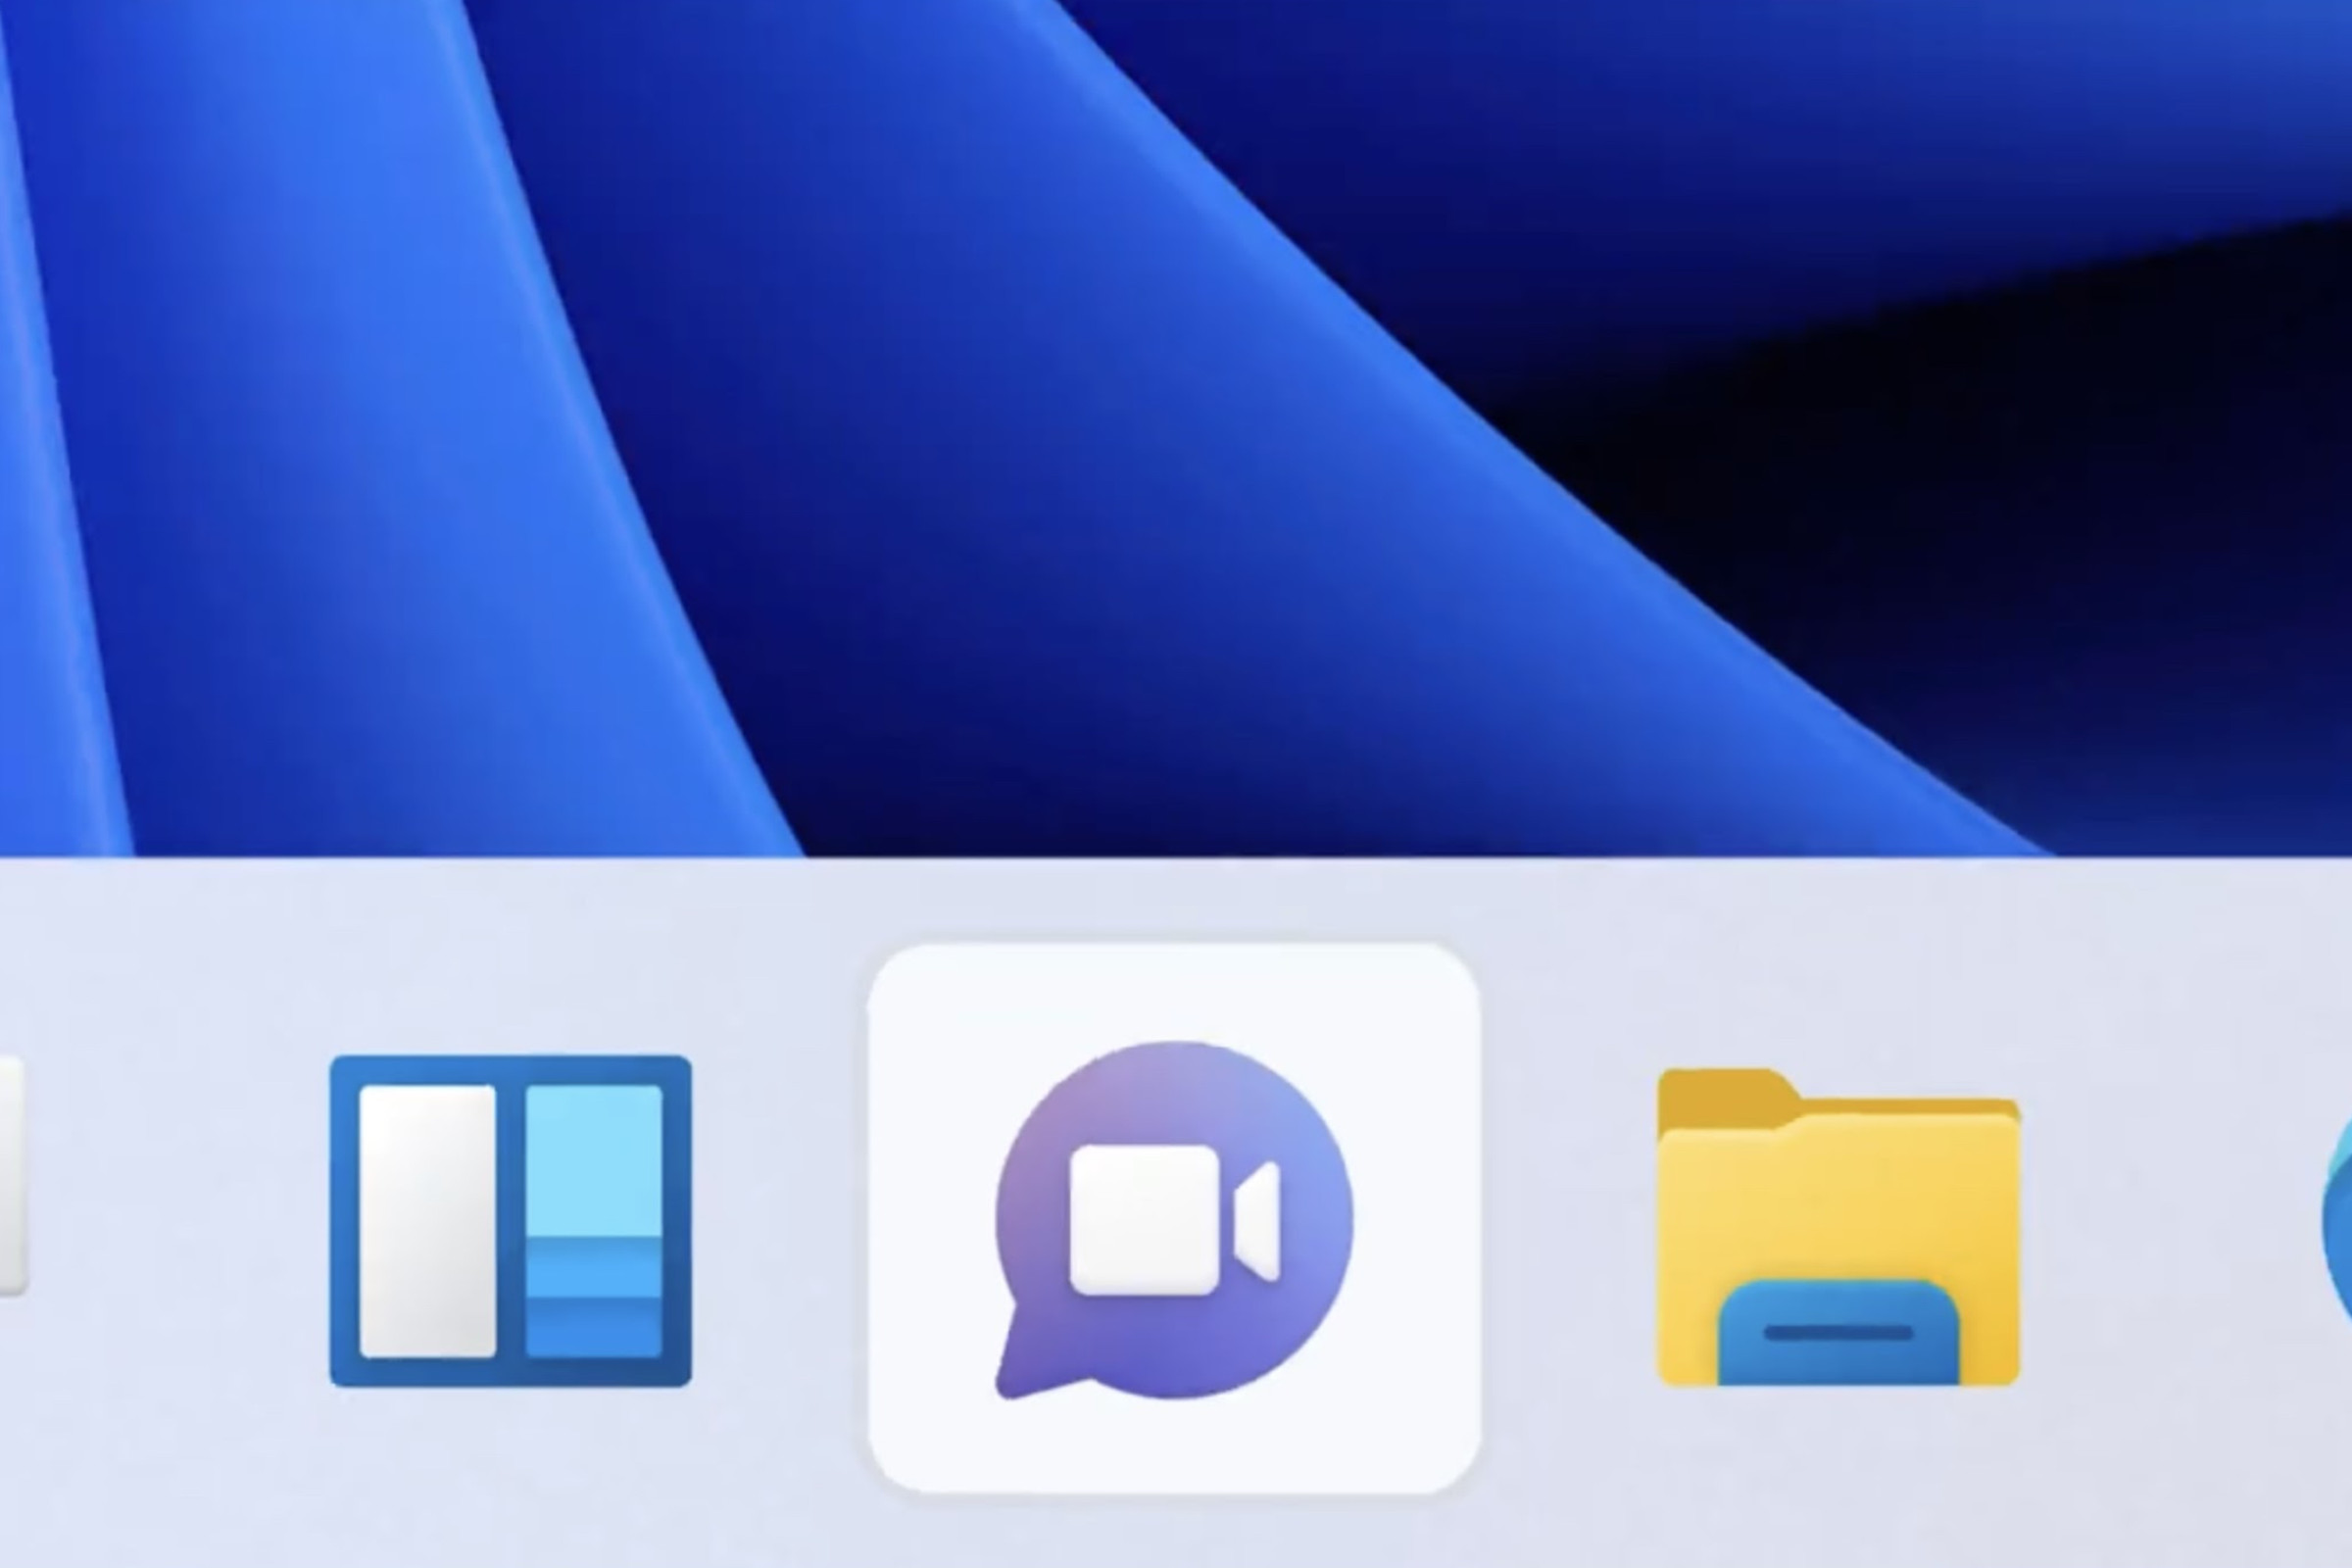 The chat icon in Windows 11